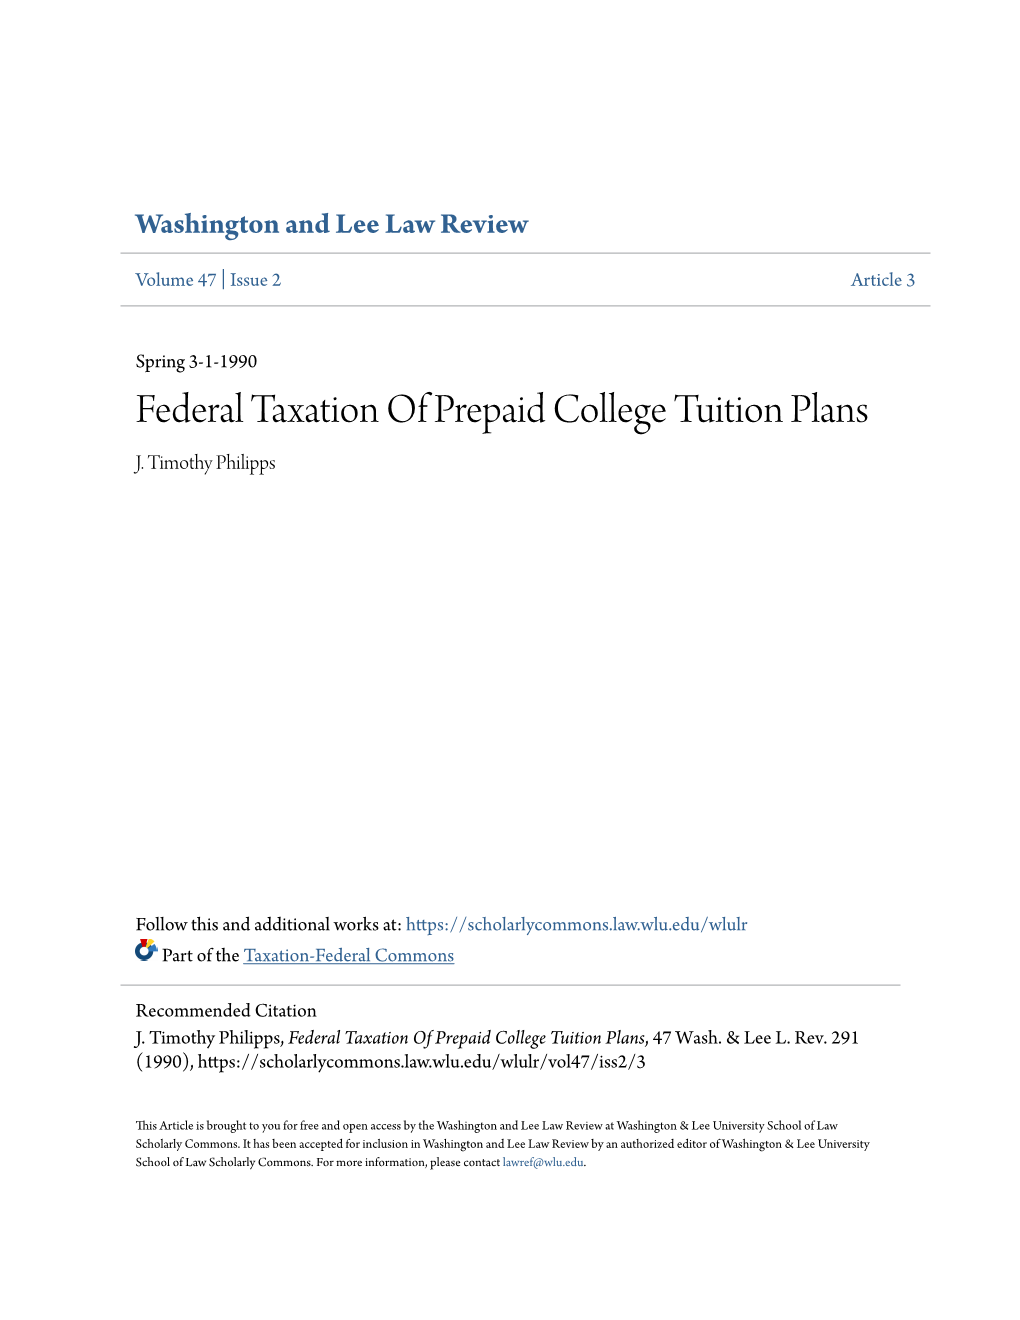 Federal Taxation of Prepaid College Tuition Plans J